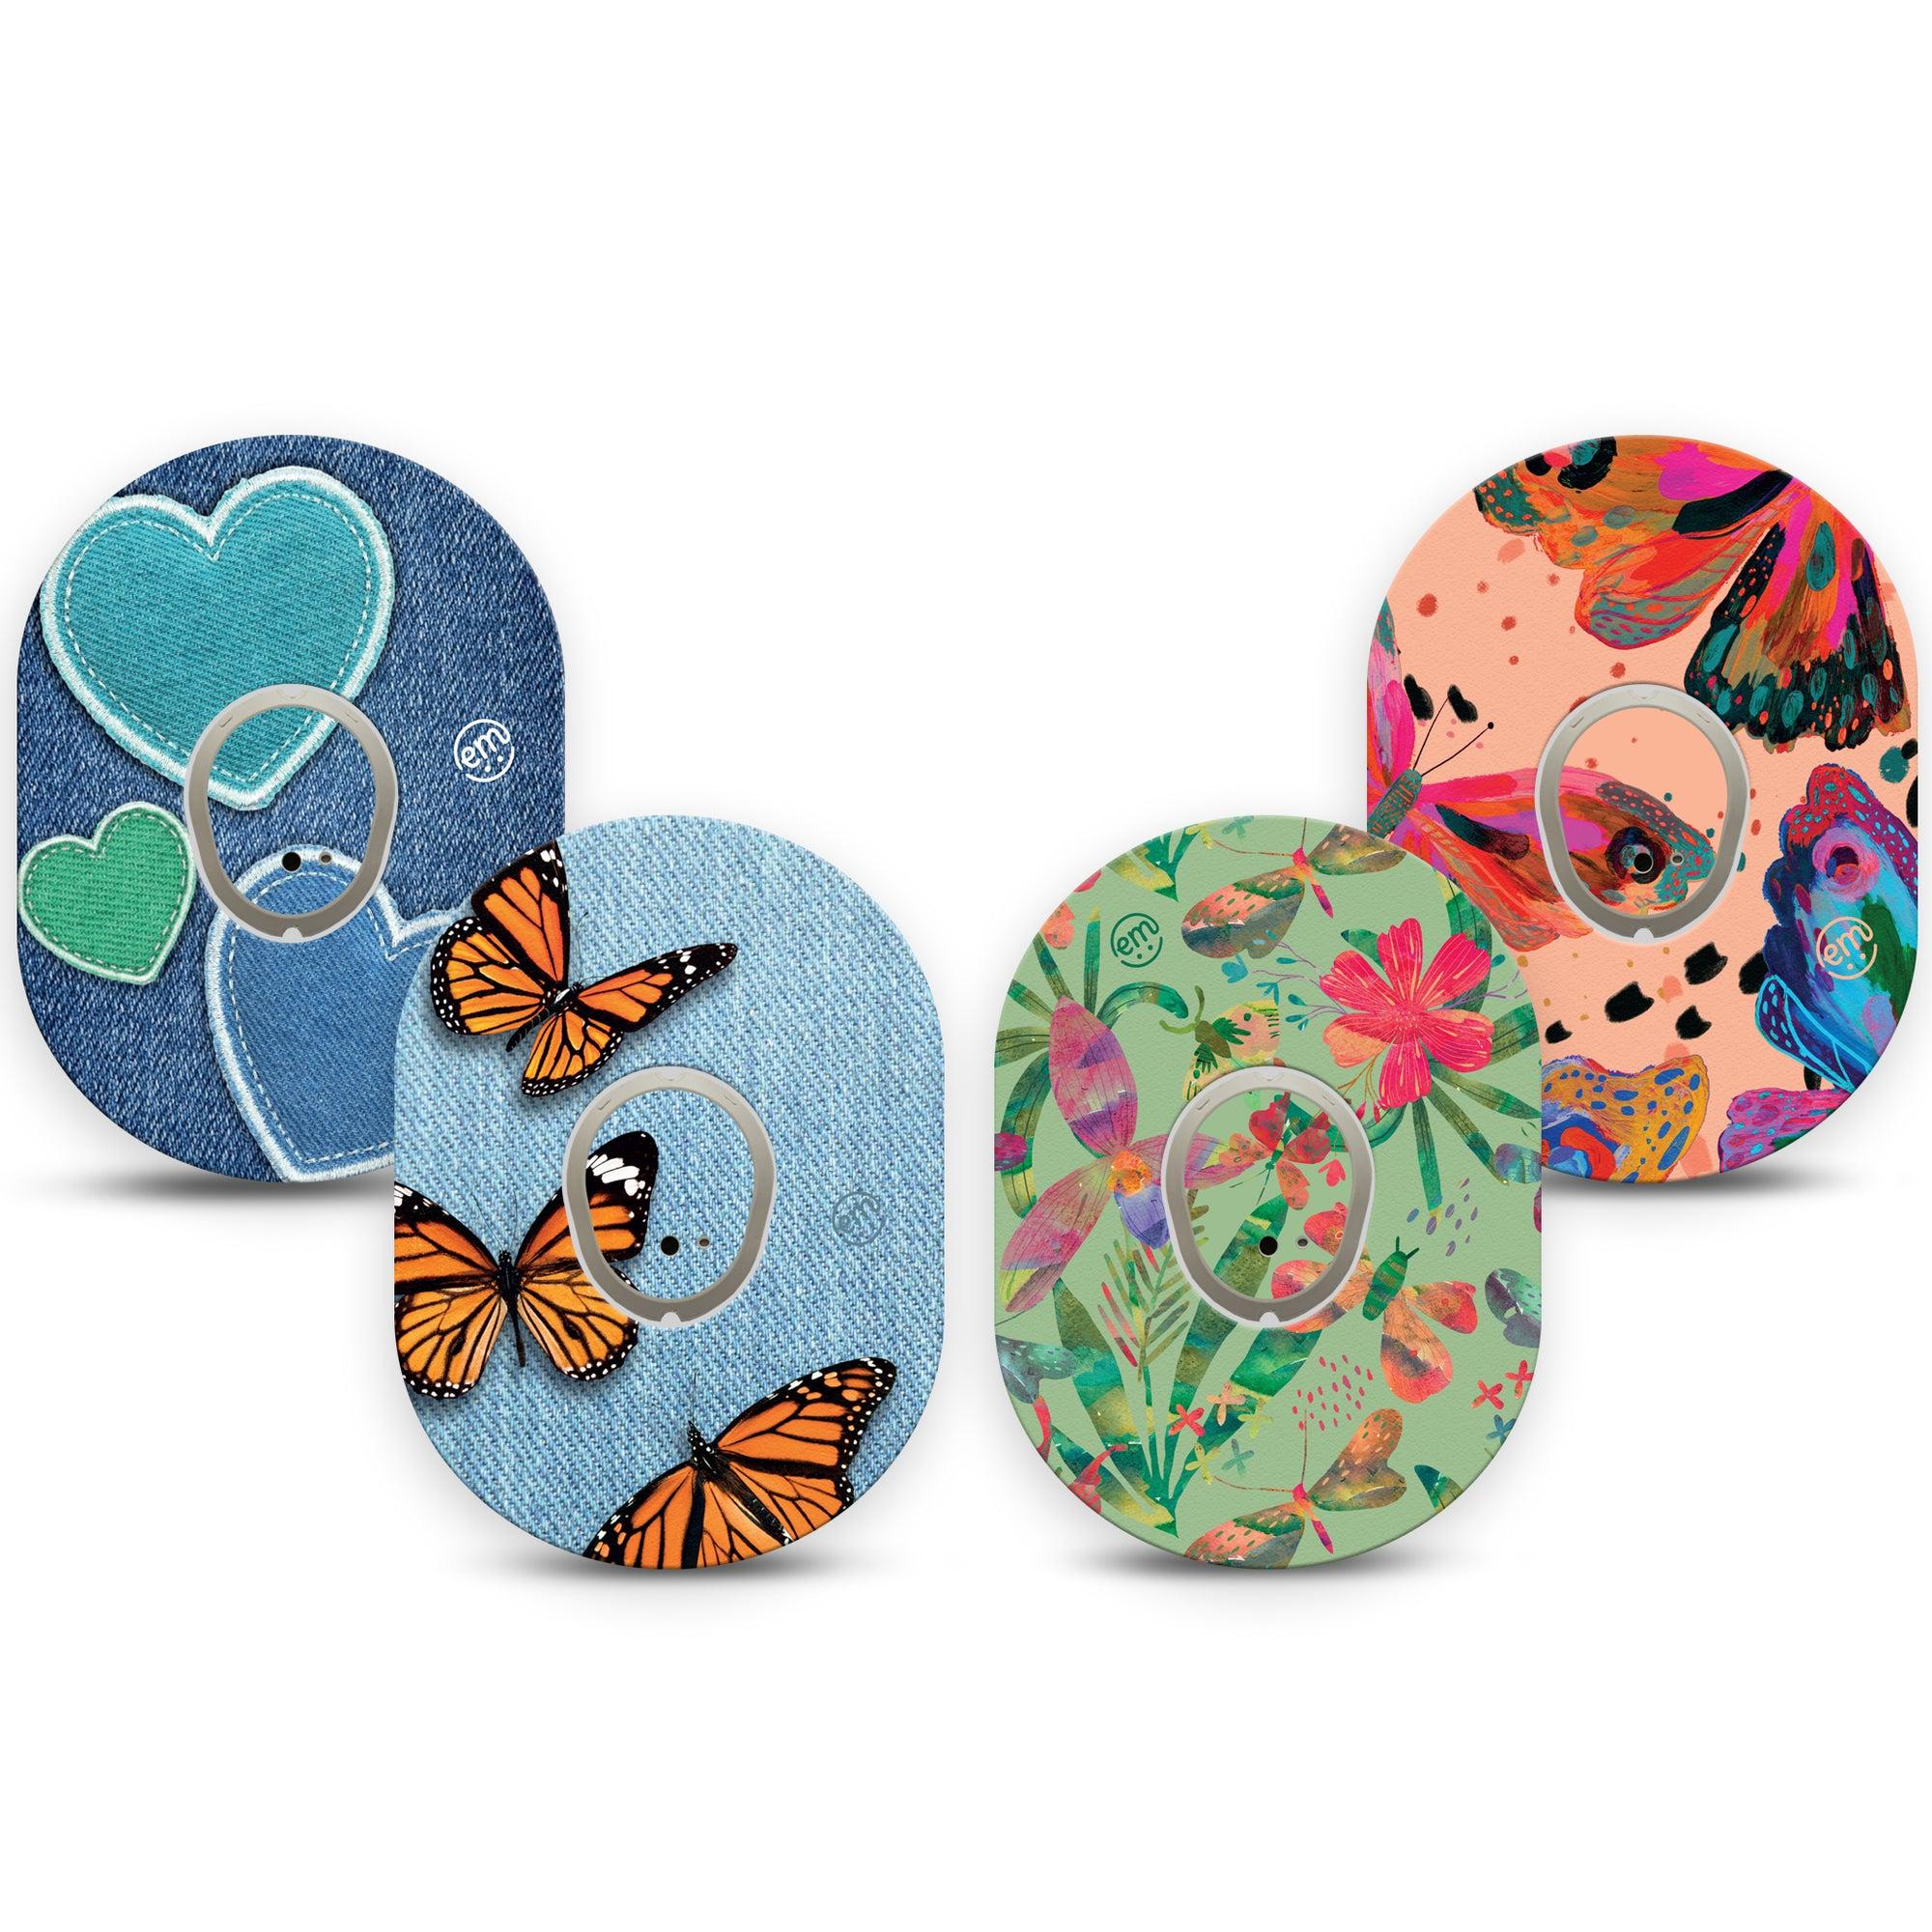 Bursting Butterflies Variety Pack Dexcom G7 Transmitter Sticker, 4-Pack, Jeans & Insects Inspired, Dexcom G7 Vinyl Center Stickers, With Matching Dexcom G7 Tapes, CGM Overlay Patch Design